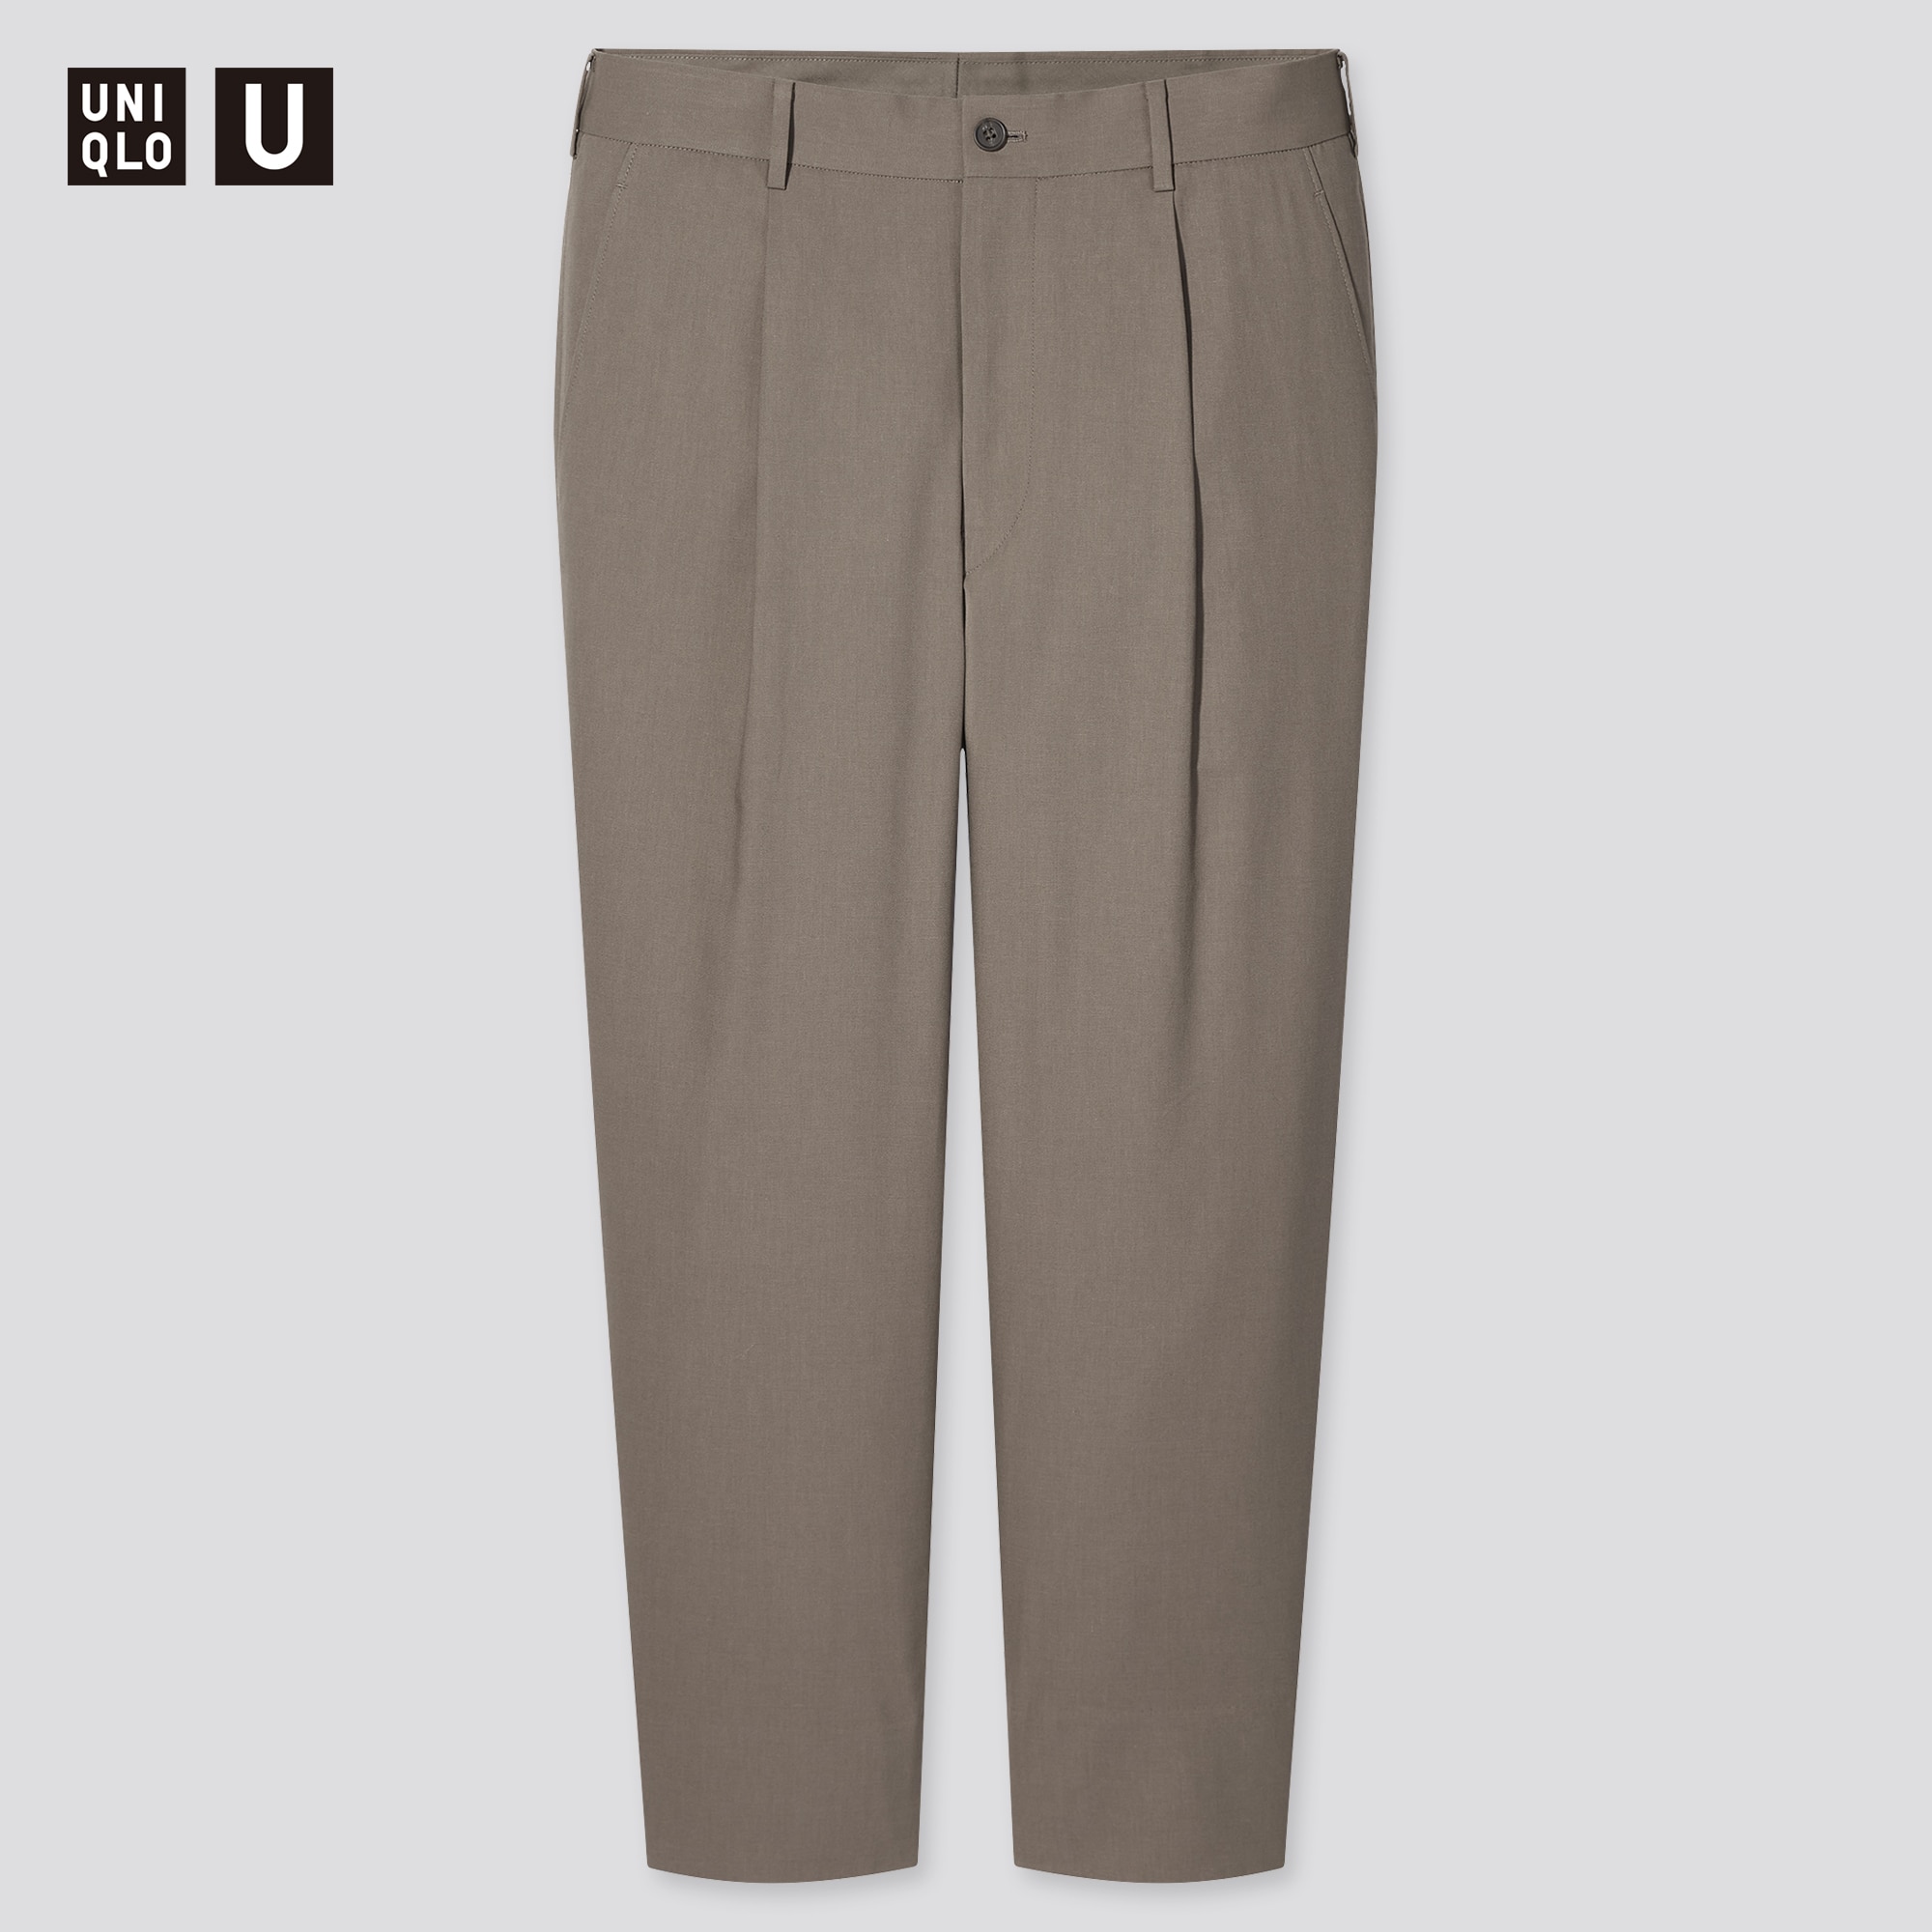 HEATTECH PLEATED TAPERED PANTS